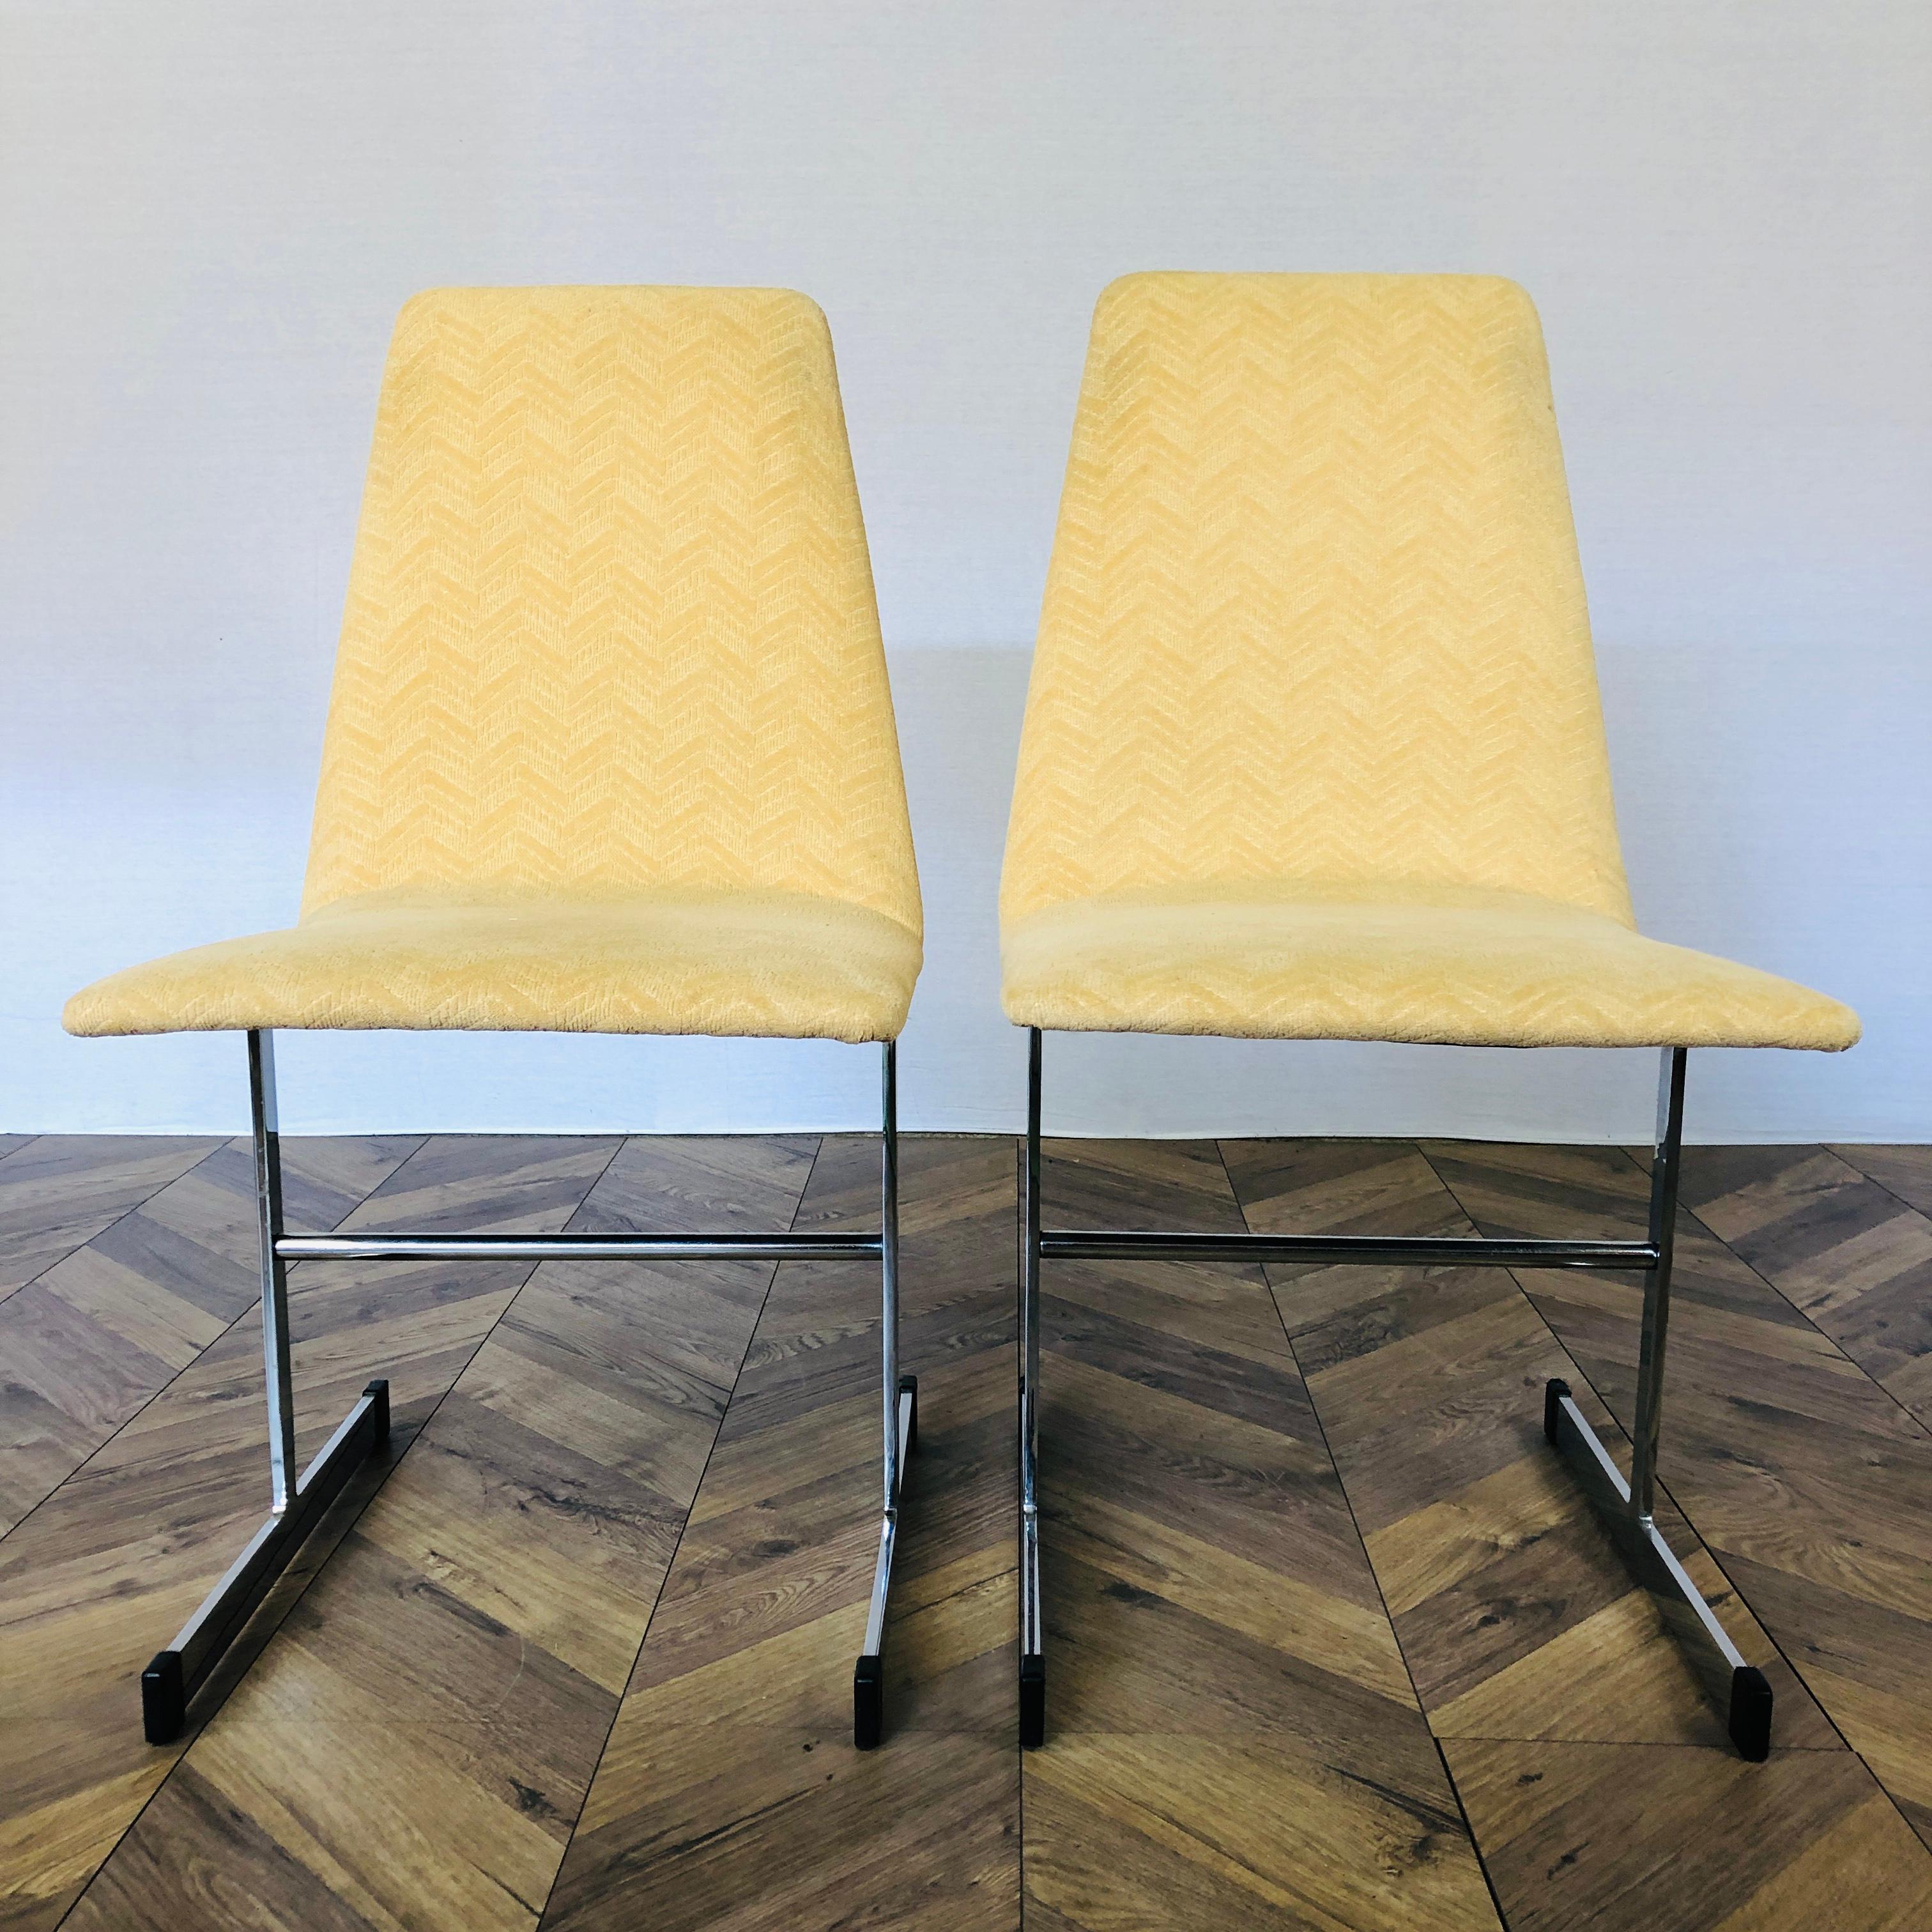 British Mid Century, Tim Bates For Pieff 'Lisse' Dining Chairs, Set of 2